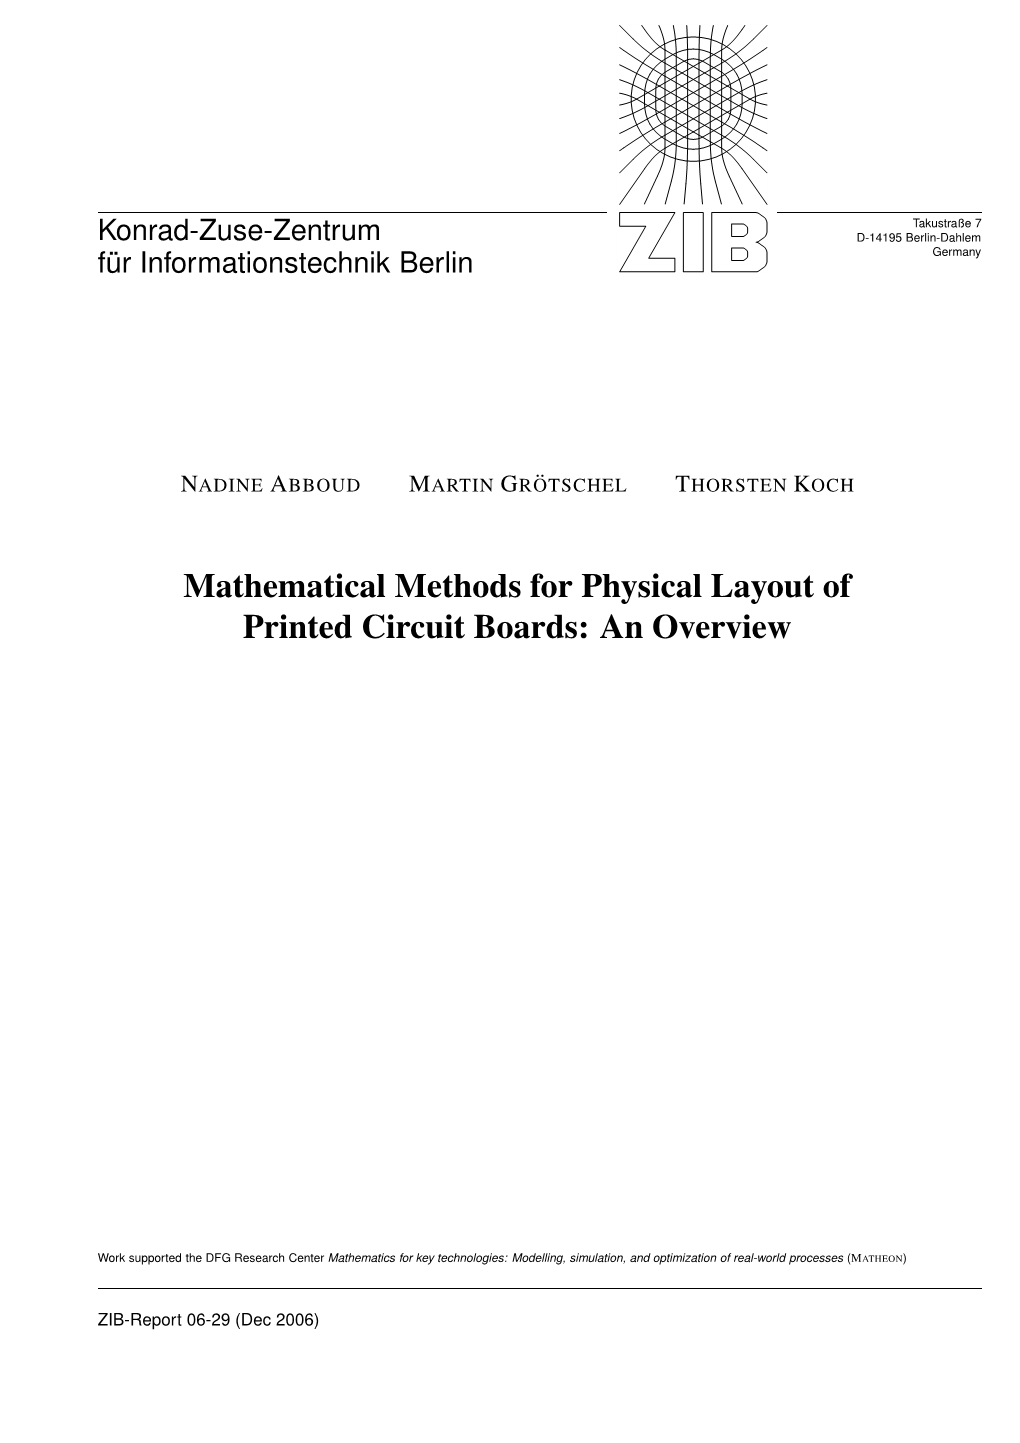 Mathematical Methods for Physical Layout of Printed Circuit Boards: an Overview